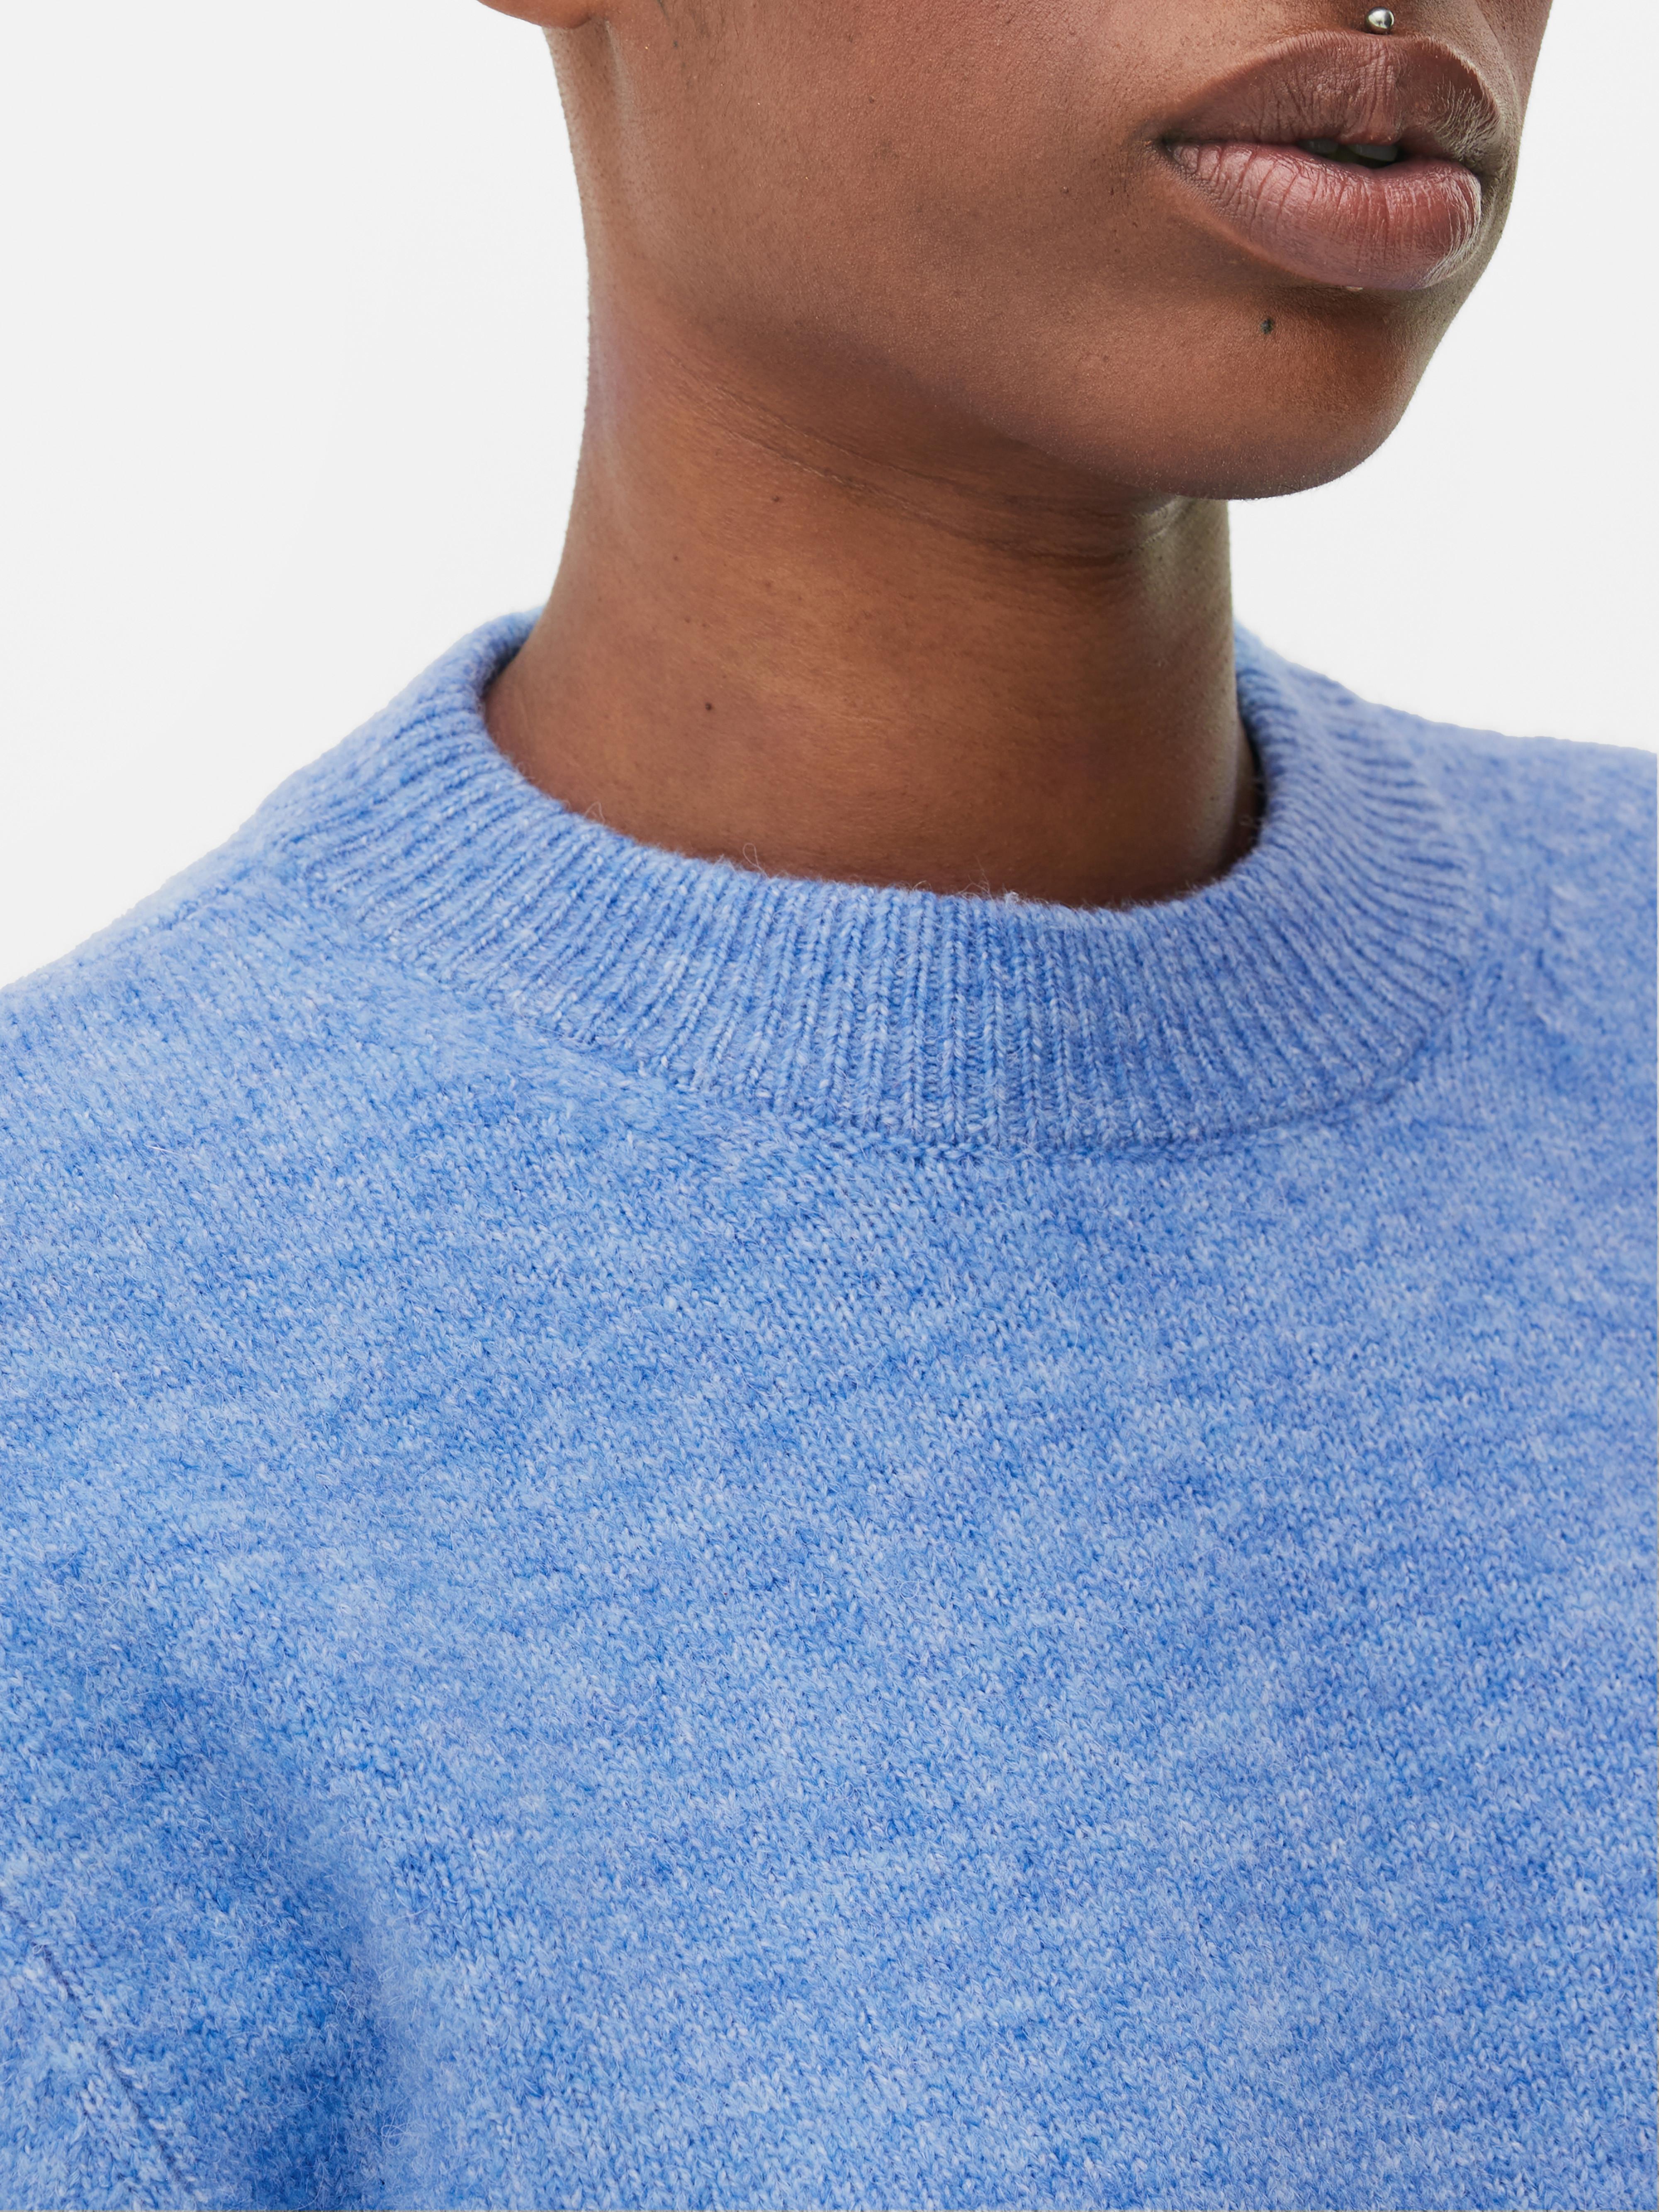 SOFT-TOUCH KNIT SWEATER - Light blue